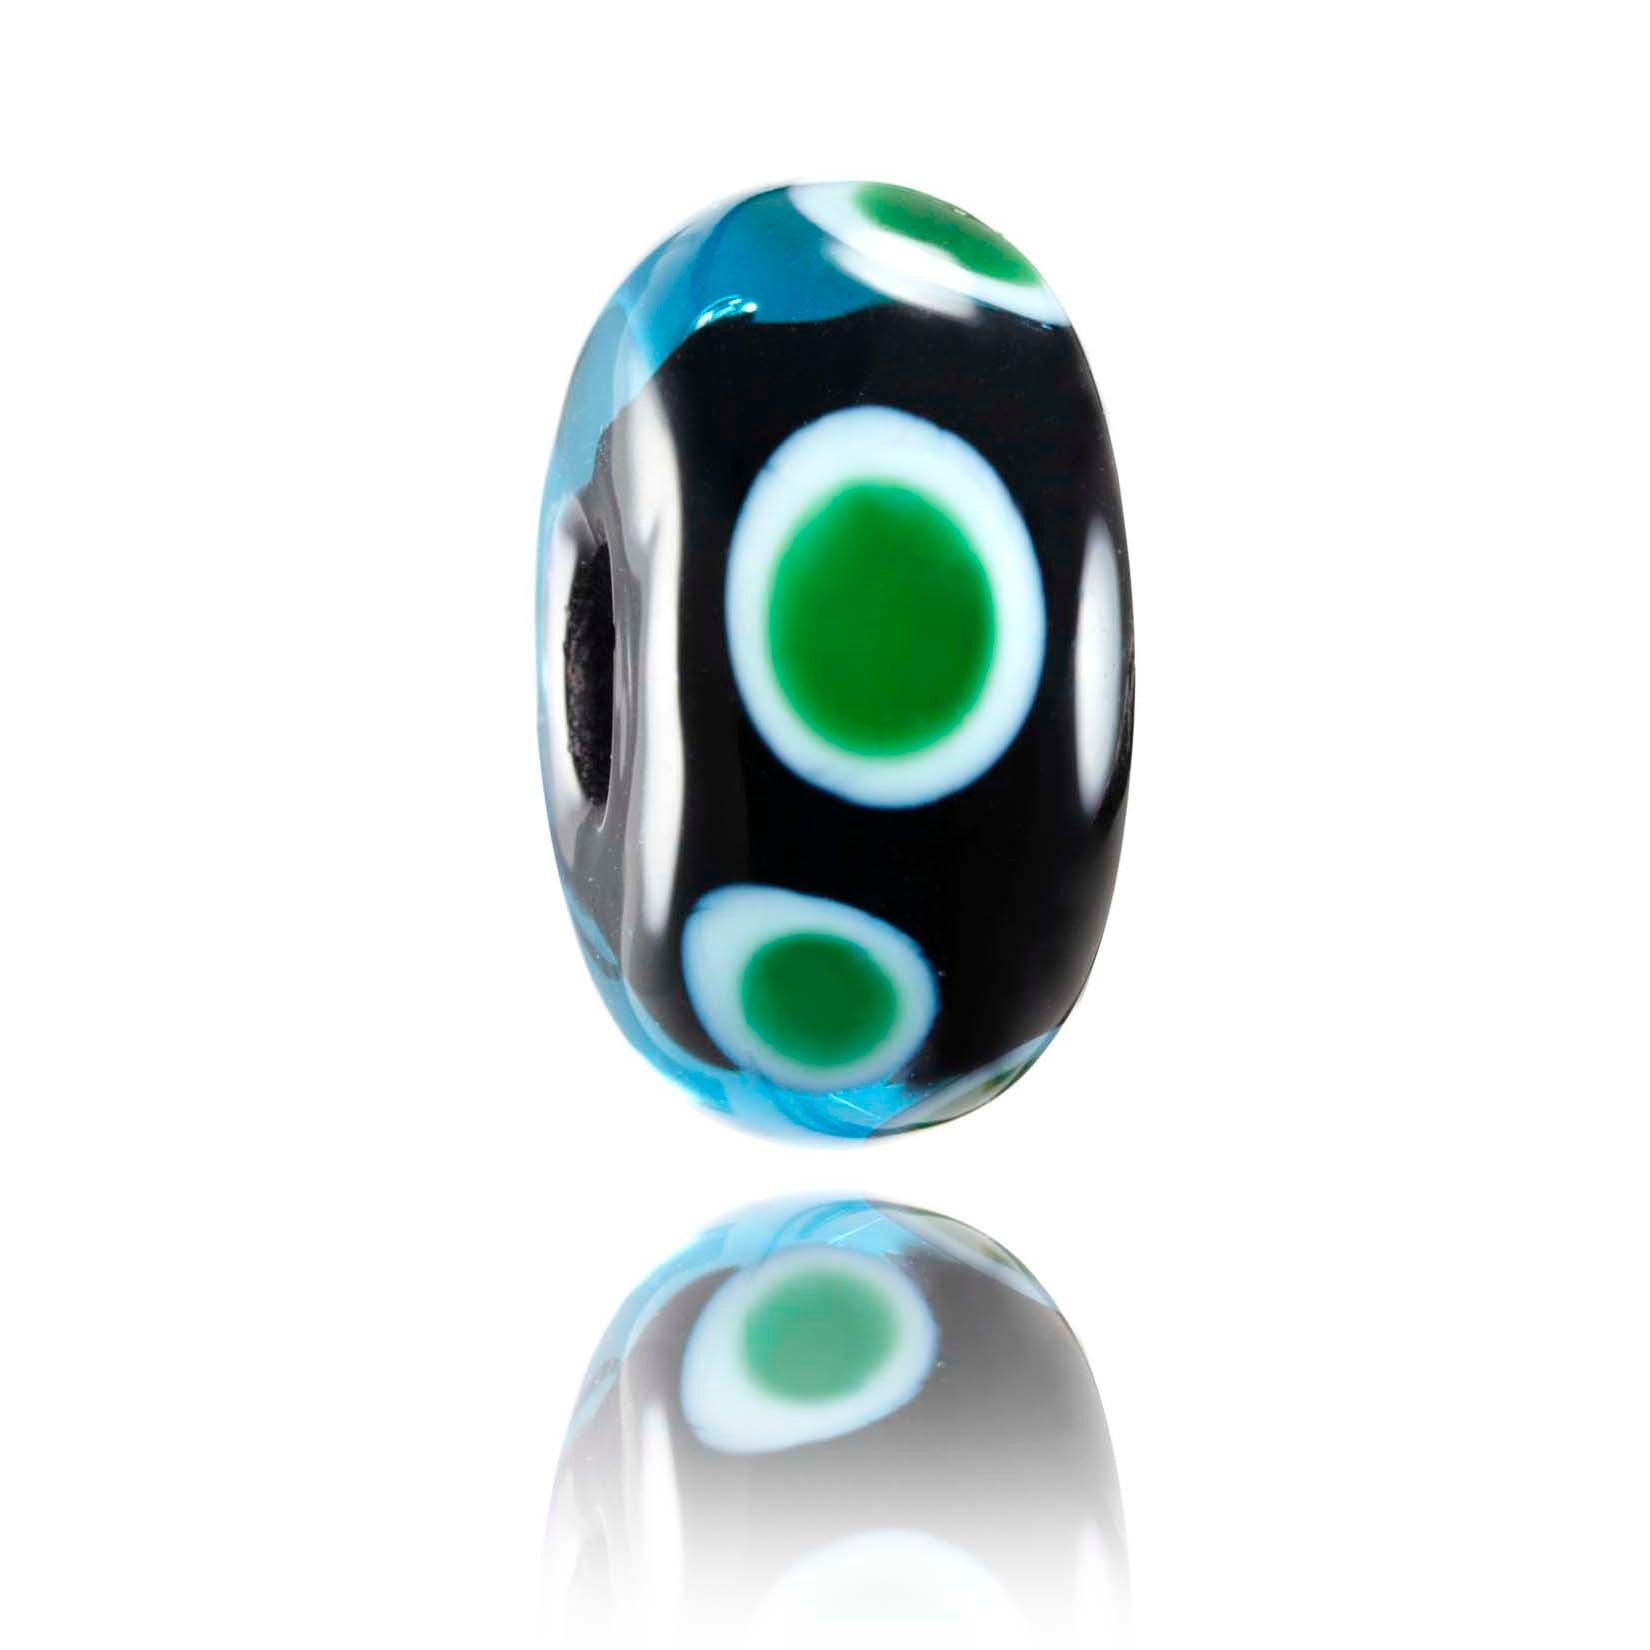 Black,. blue bead with green on white dots representing the Canary Islands.